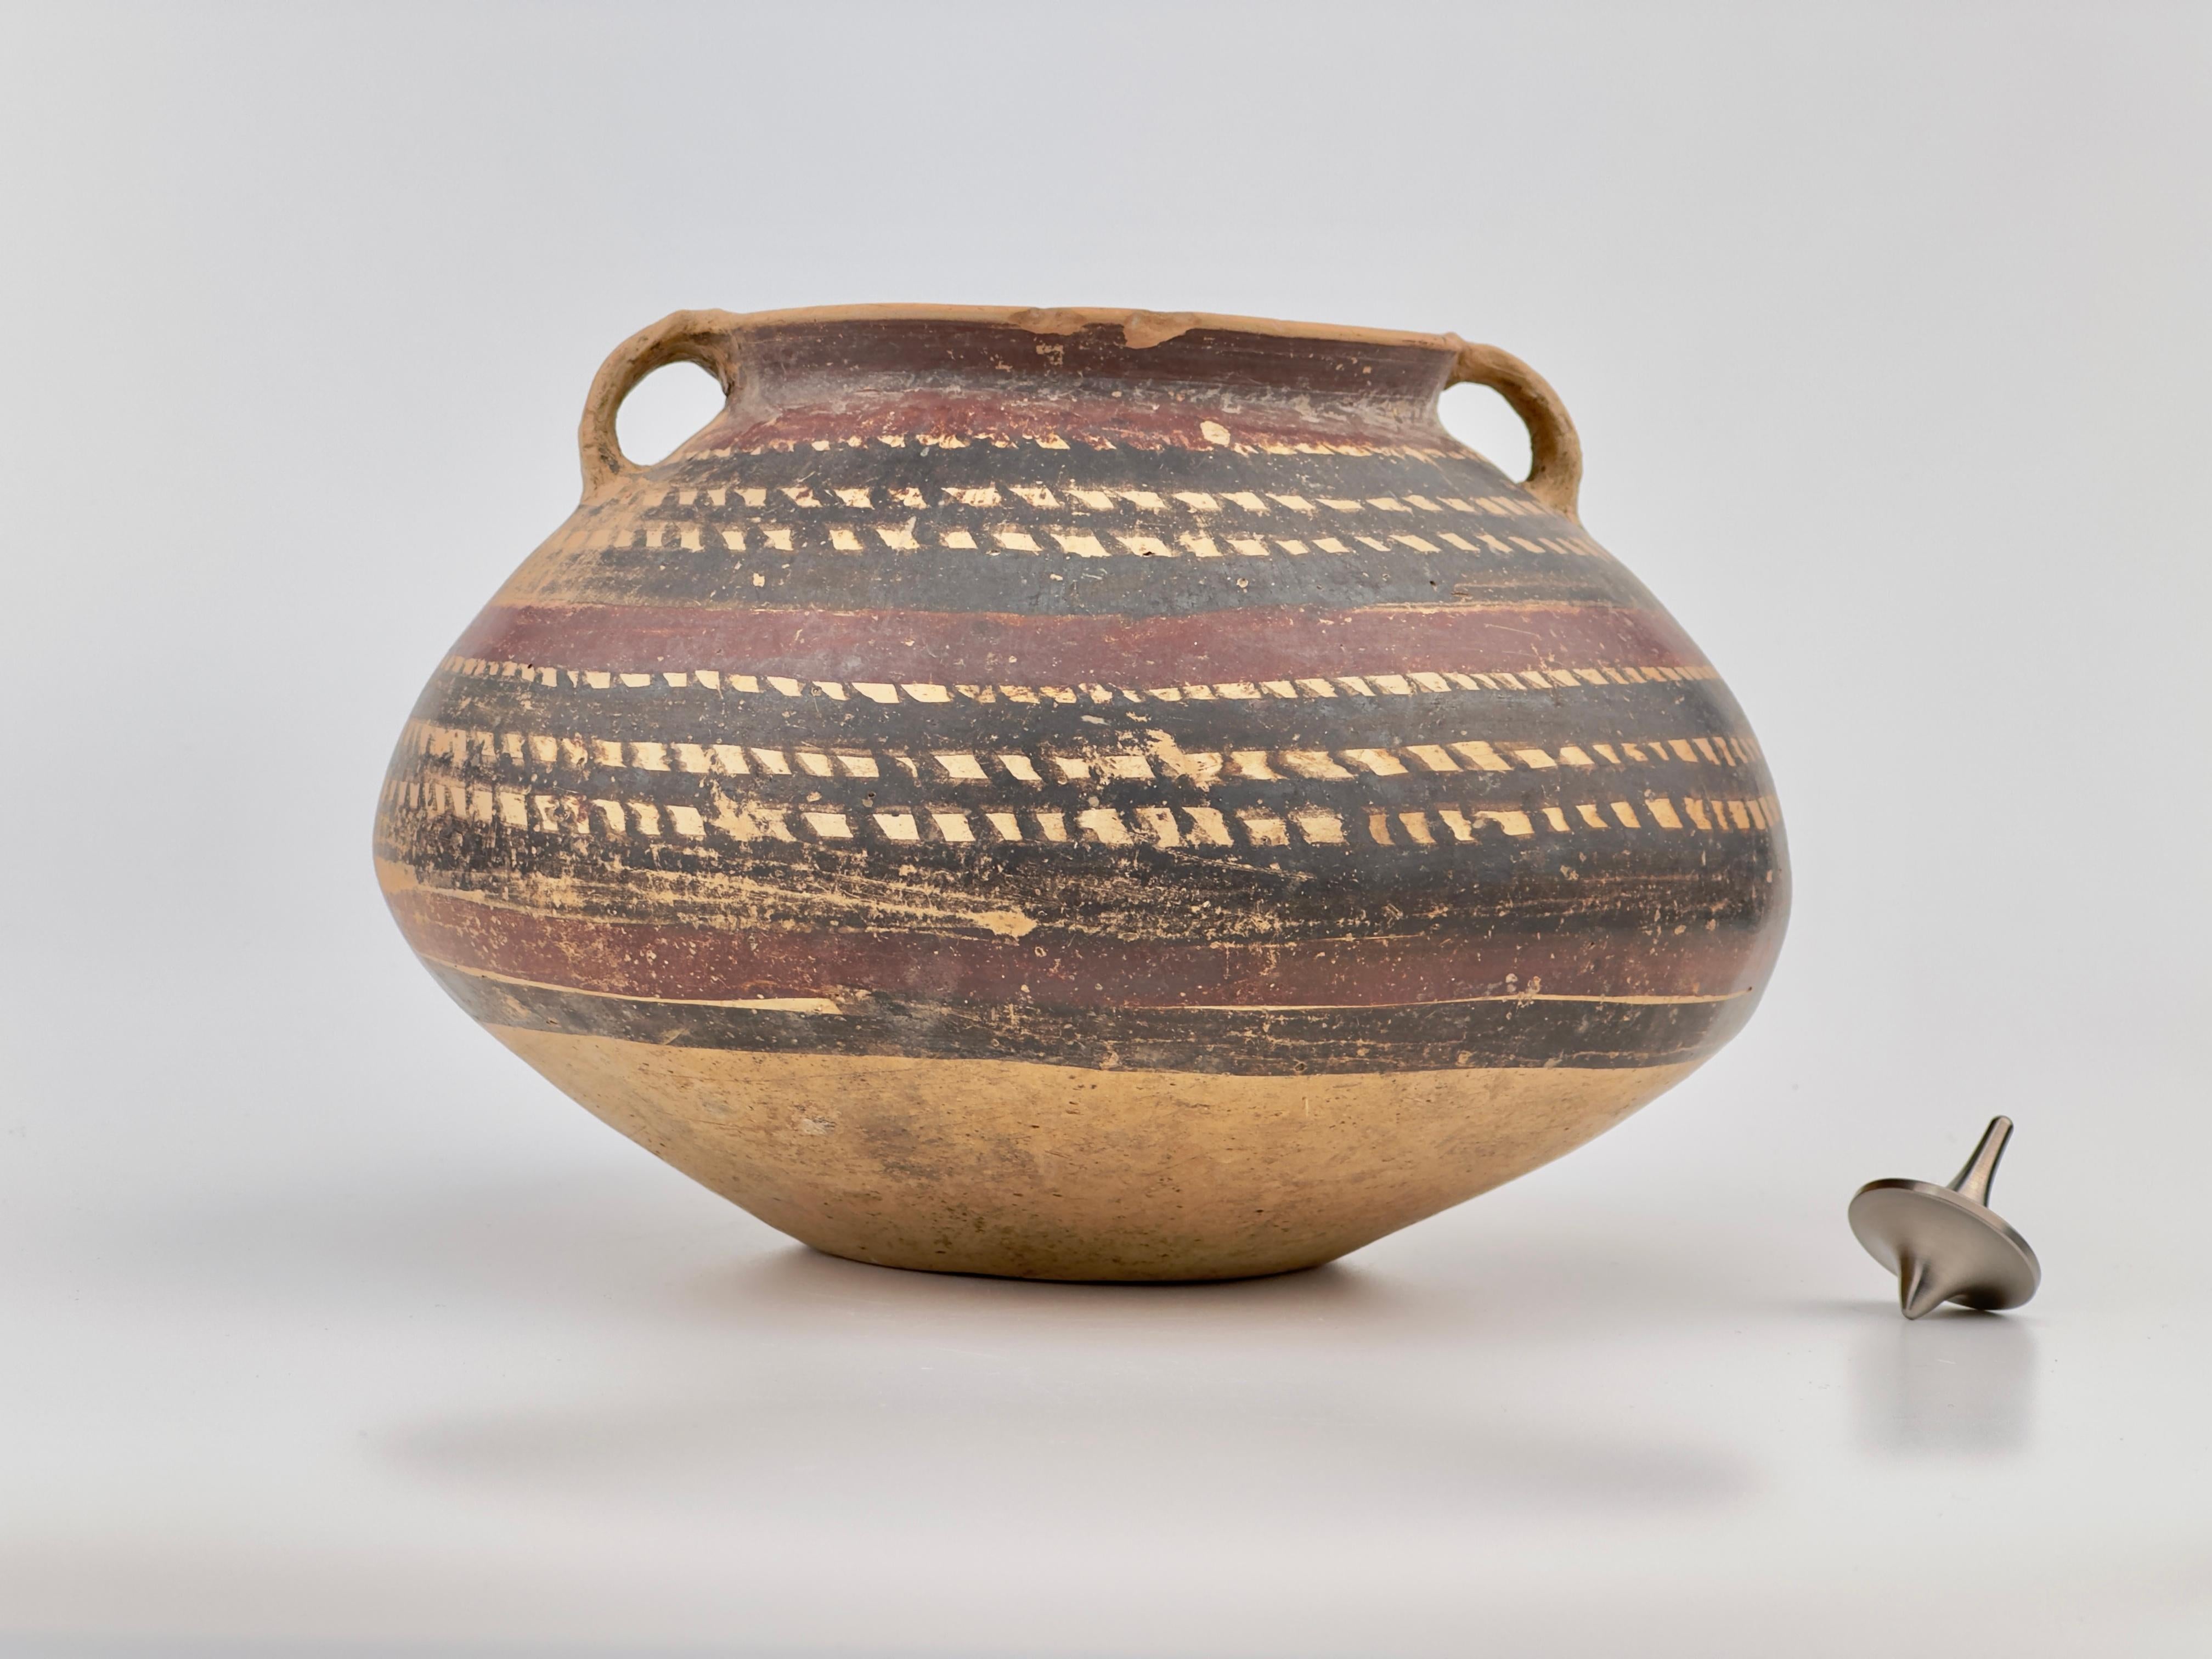 This pottery has a bulbous body with two small, protruding handles near its widest part. The pottery features horizontal bands of patterns, which include a sequence of geometric shapes and lines. The patterns are rendered in a dark pigment, possibly